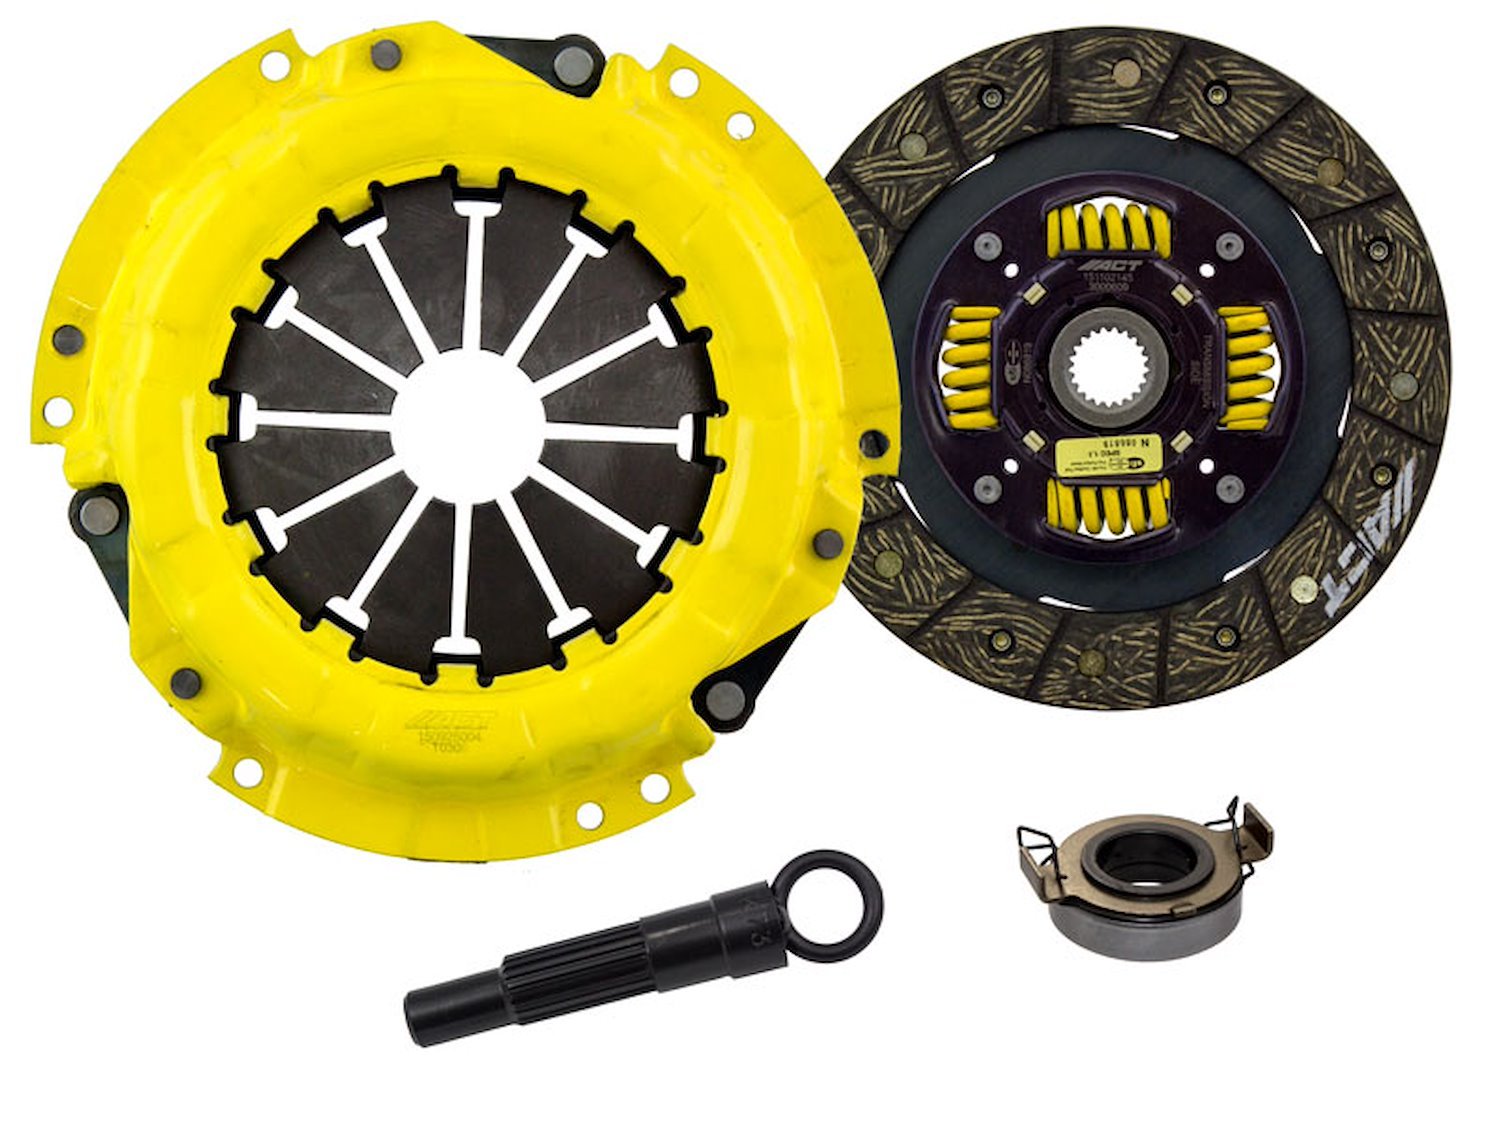 HD/Performance Street Sprung Transmission Clutch Kit Fits Select Multiple Makes/Models